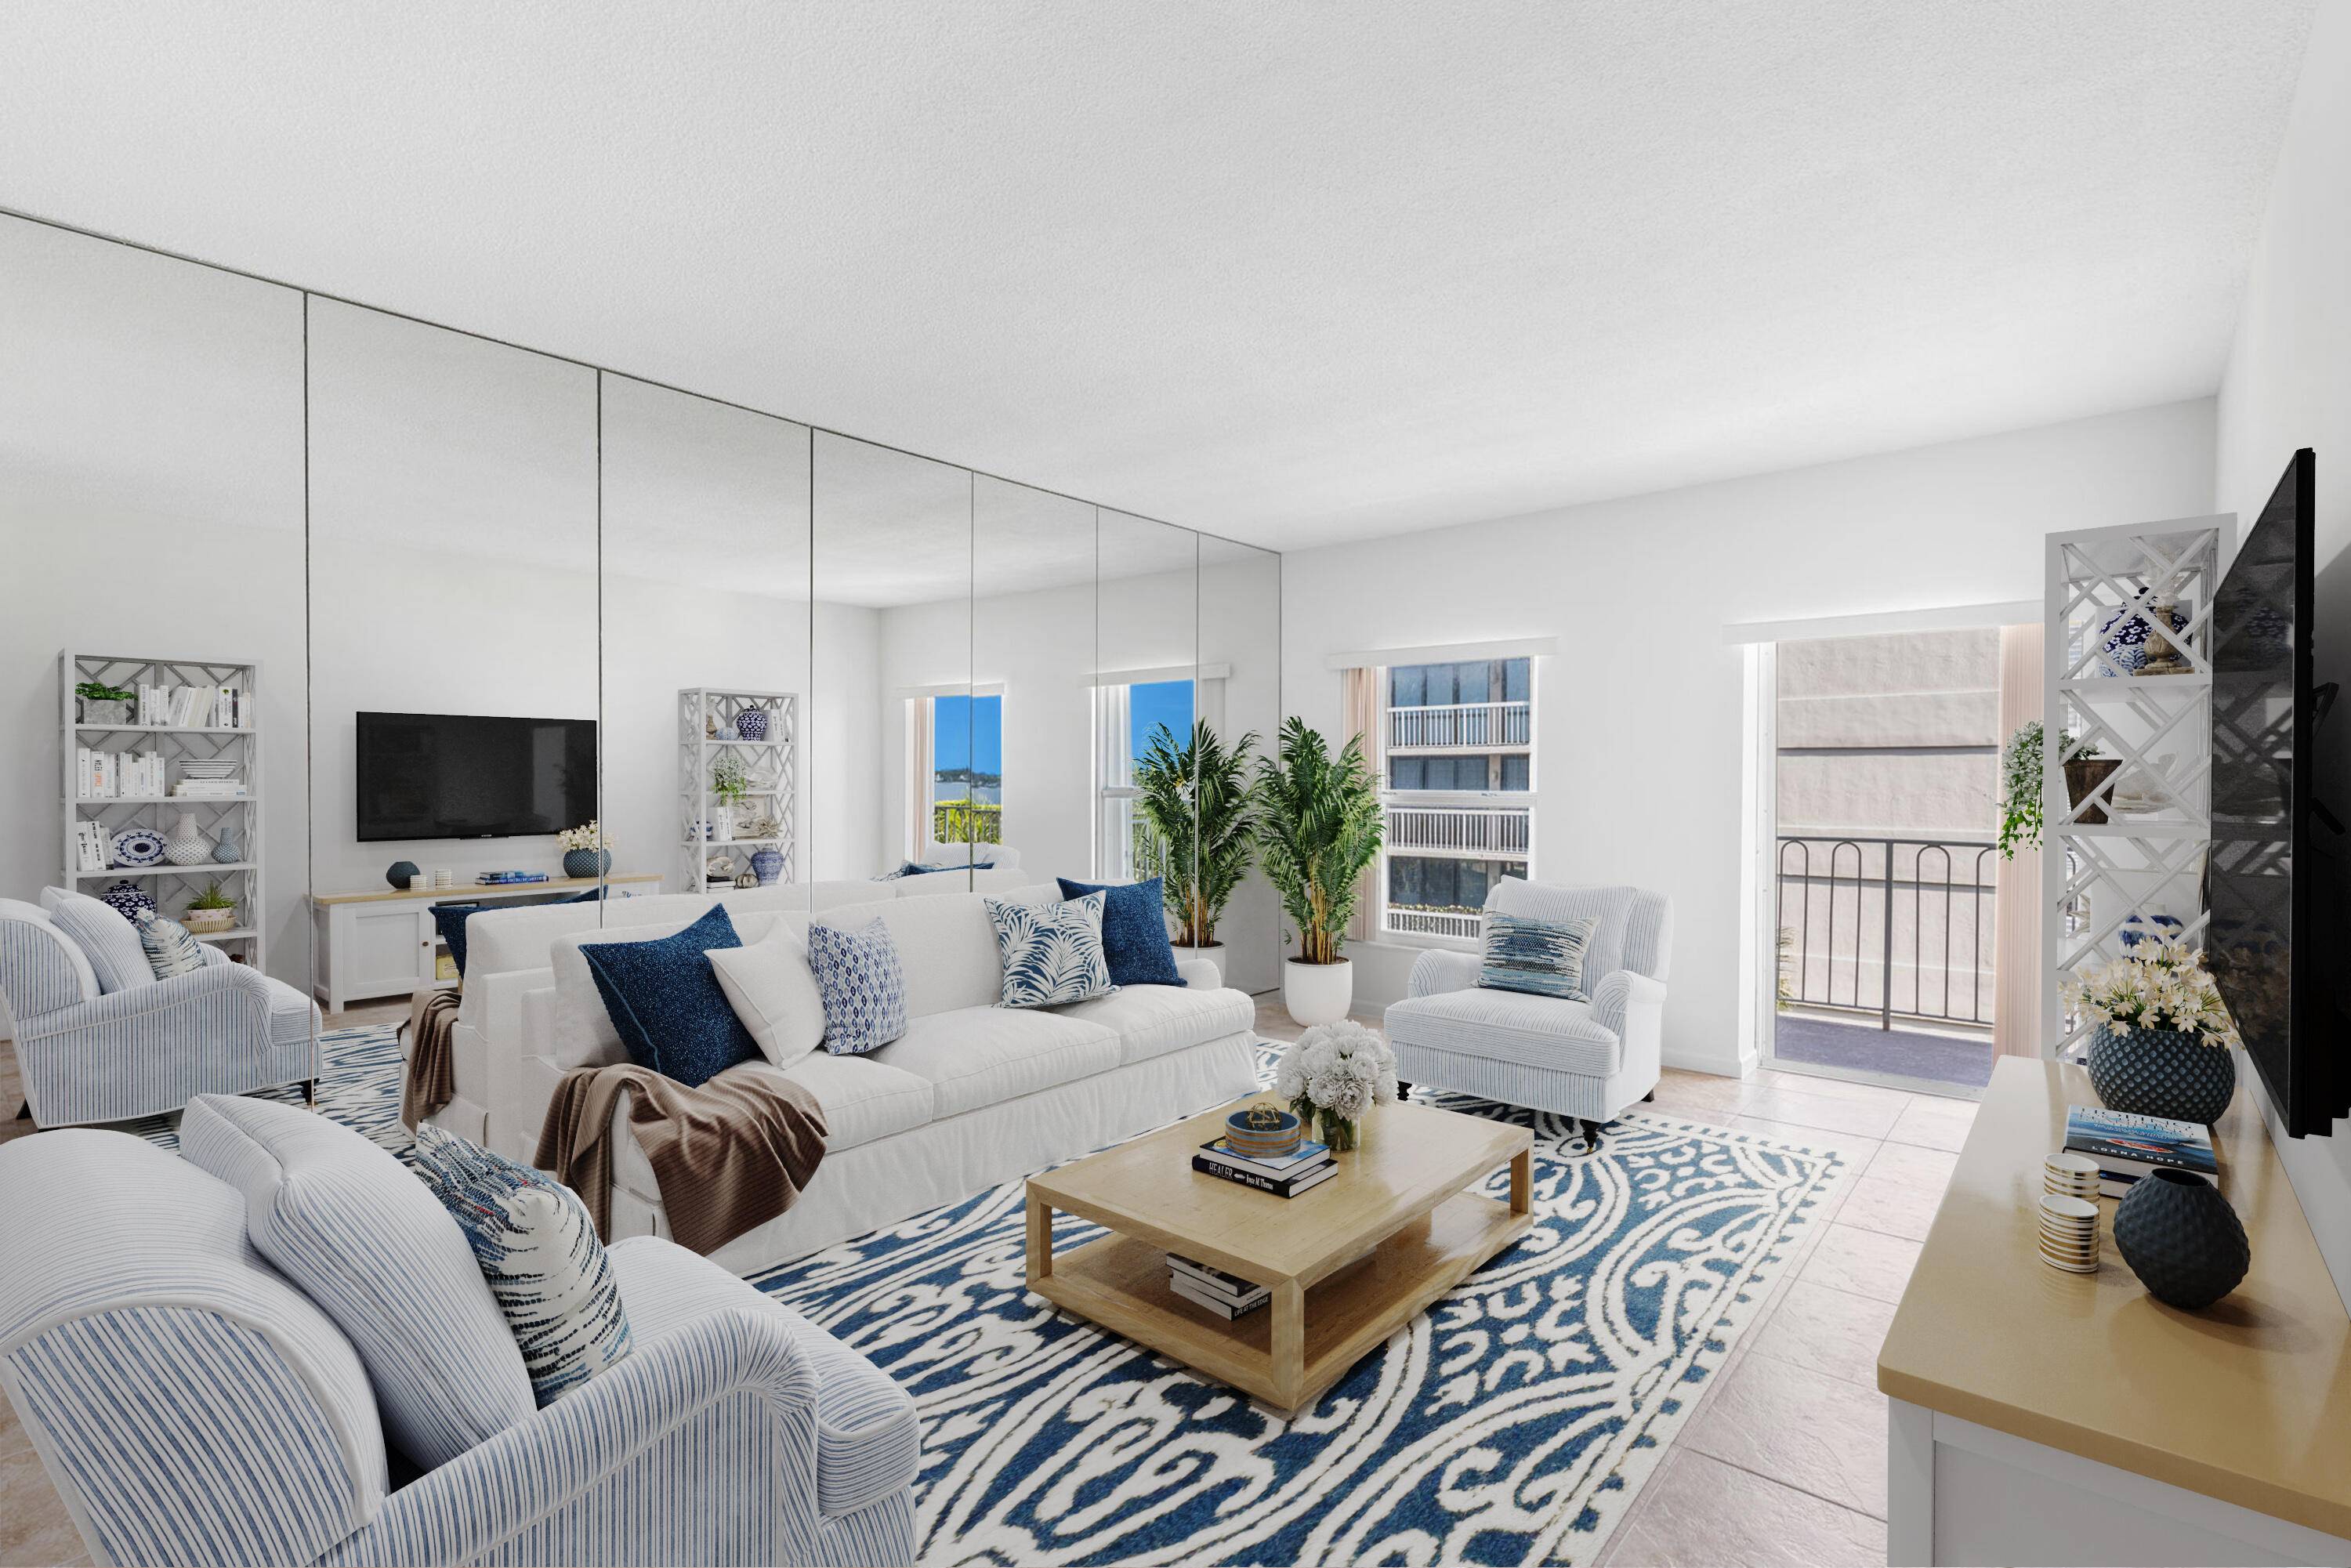 Bright Spacious 2 Bedroom 2 Full Bathroom Condo With Ocean Intracoastal Views La Renaissance Is A Well Managed, Meticulously Maintained Building, Featuring A Newly Renovated Lobby, Large Community Room w ...